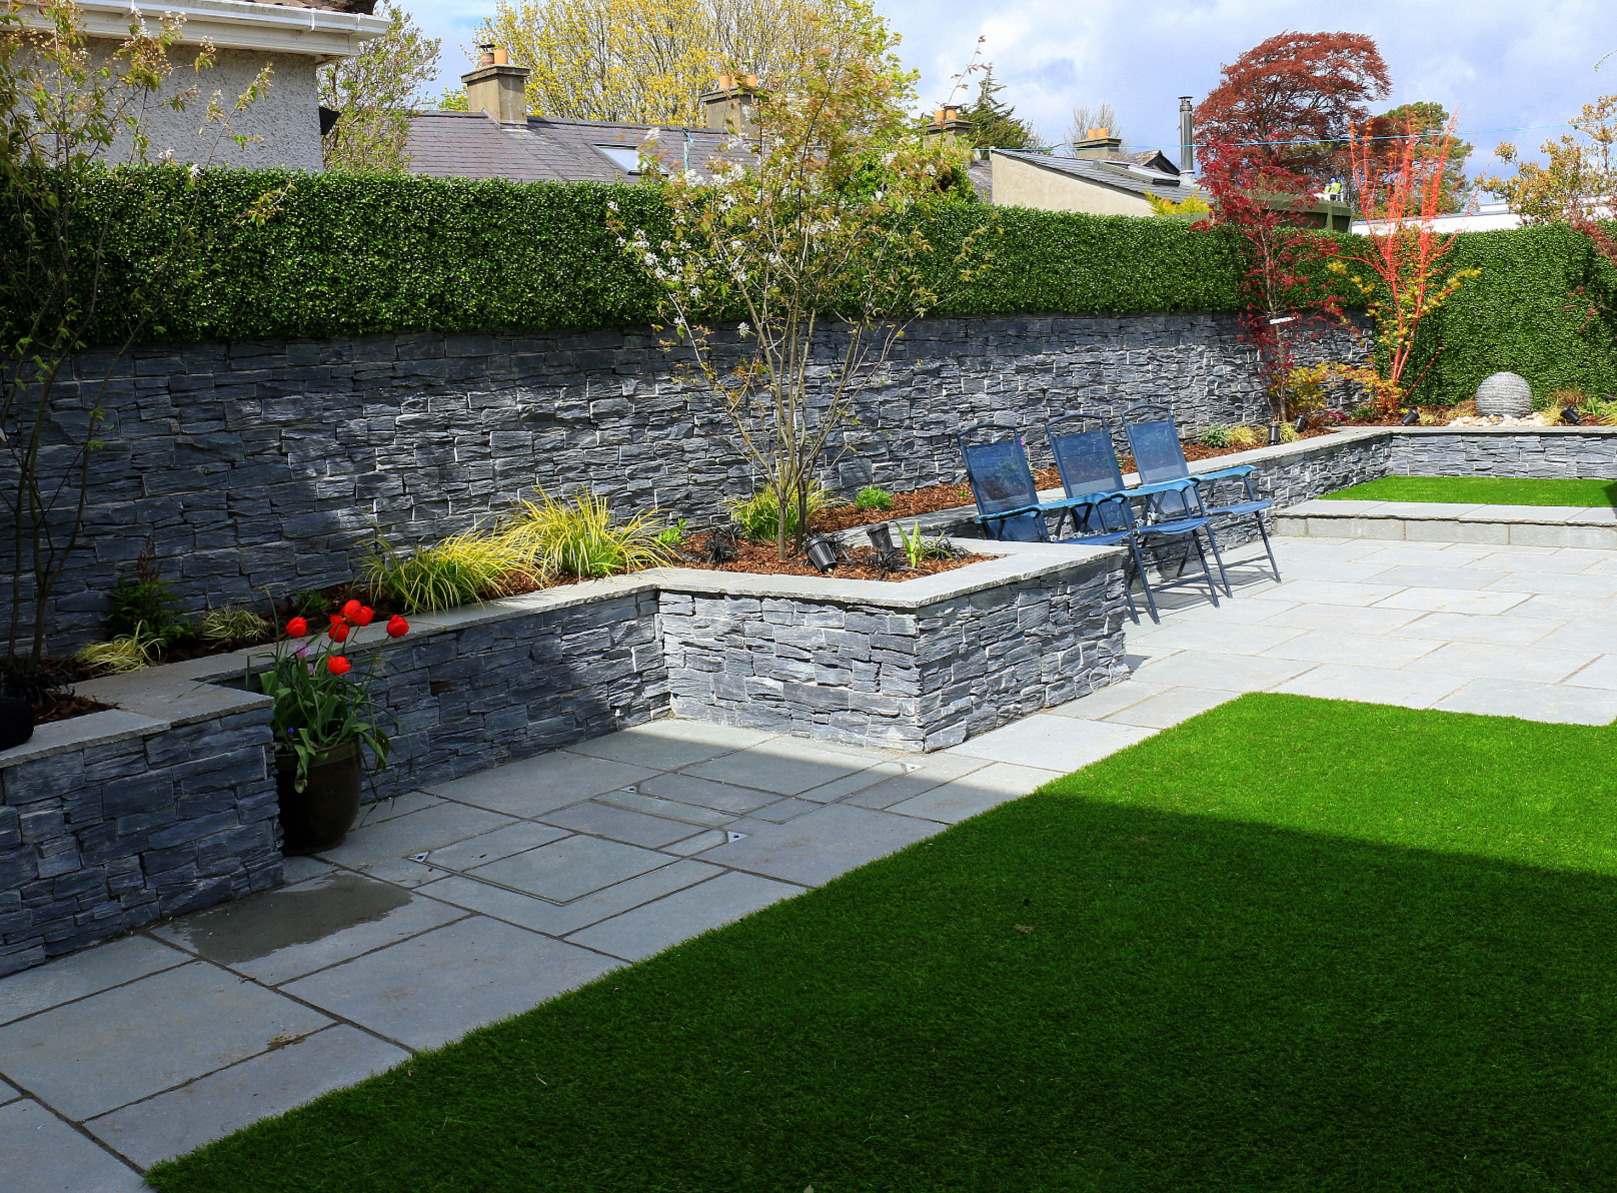 Stone cladding is used effectively on garden and raised planter bed walls